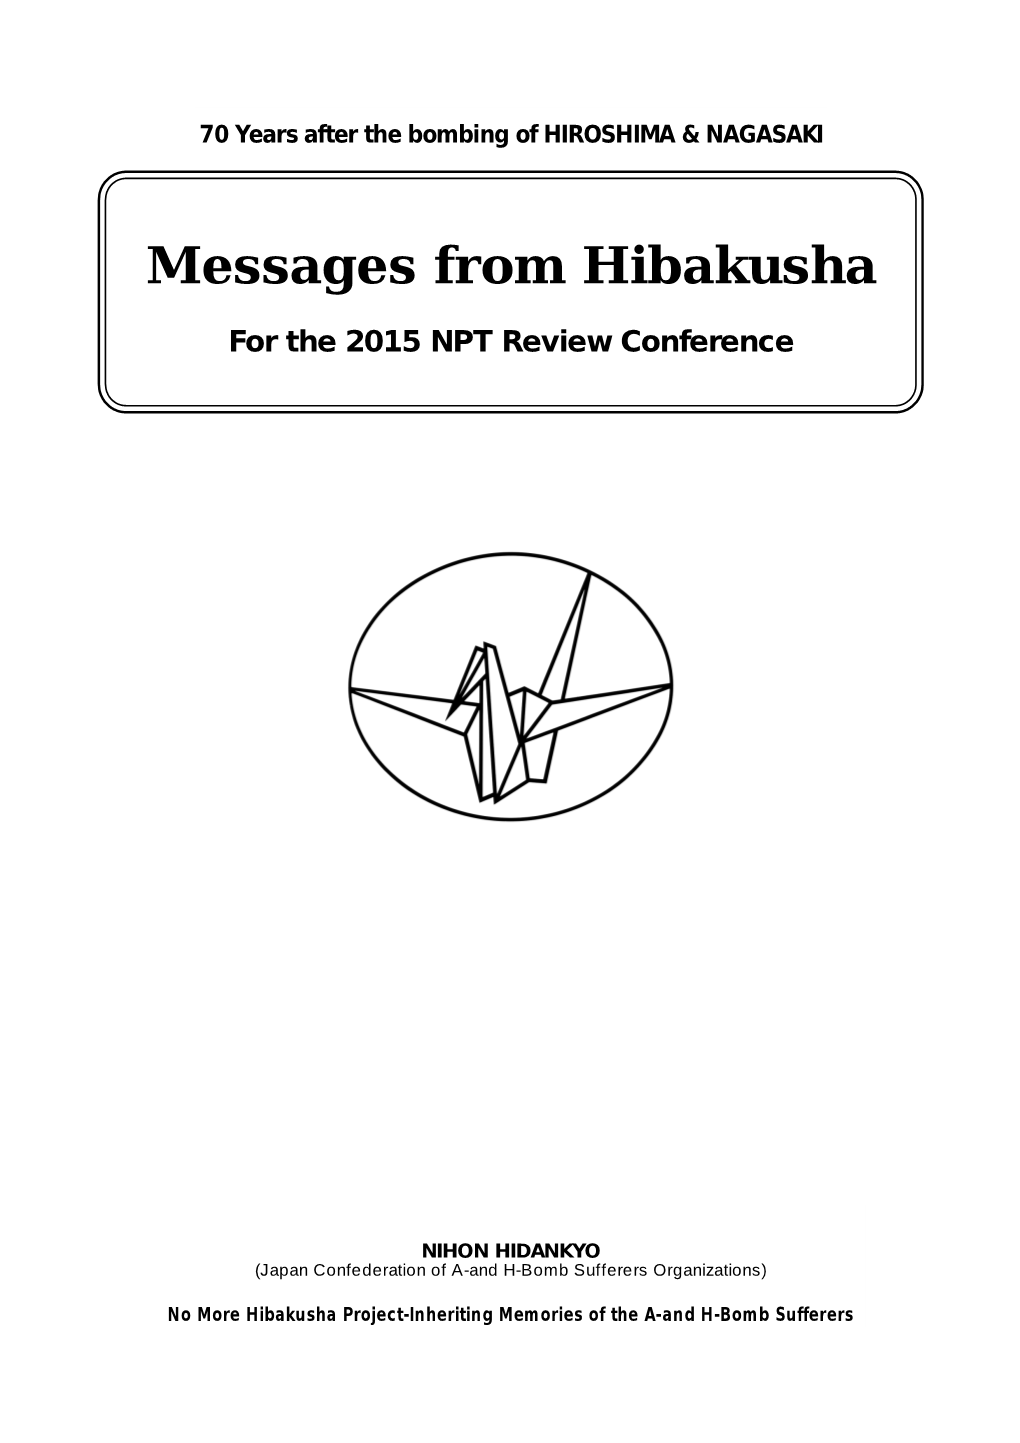 Messages from Hibakusha -- for the 2015 NPT Review Conference